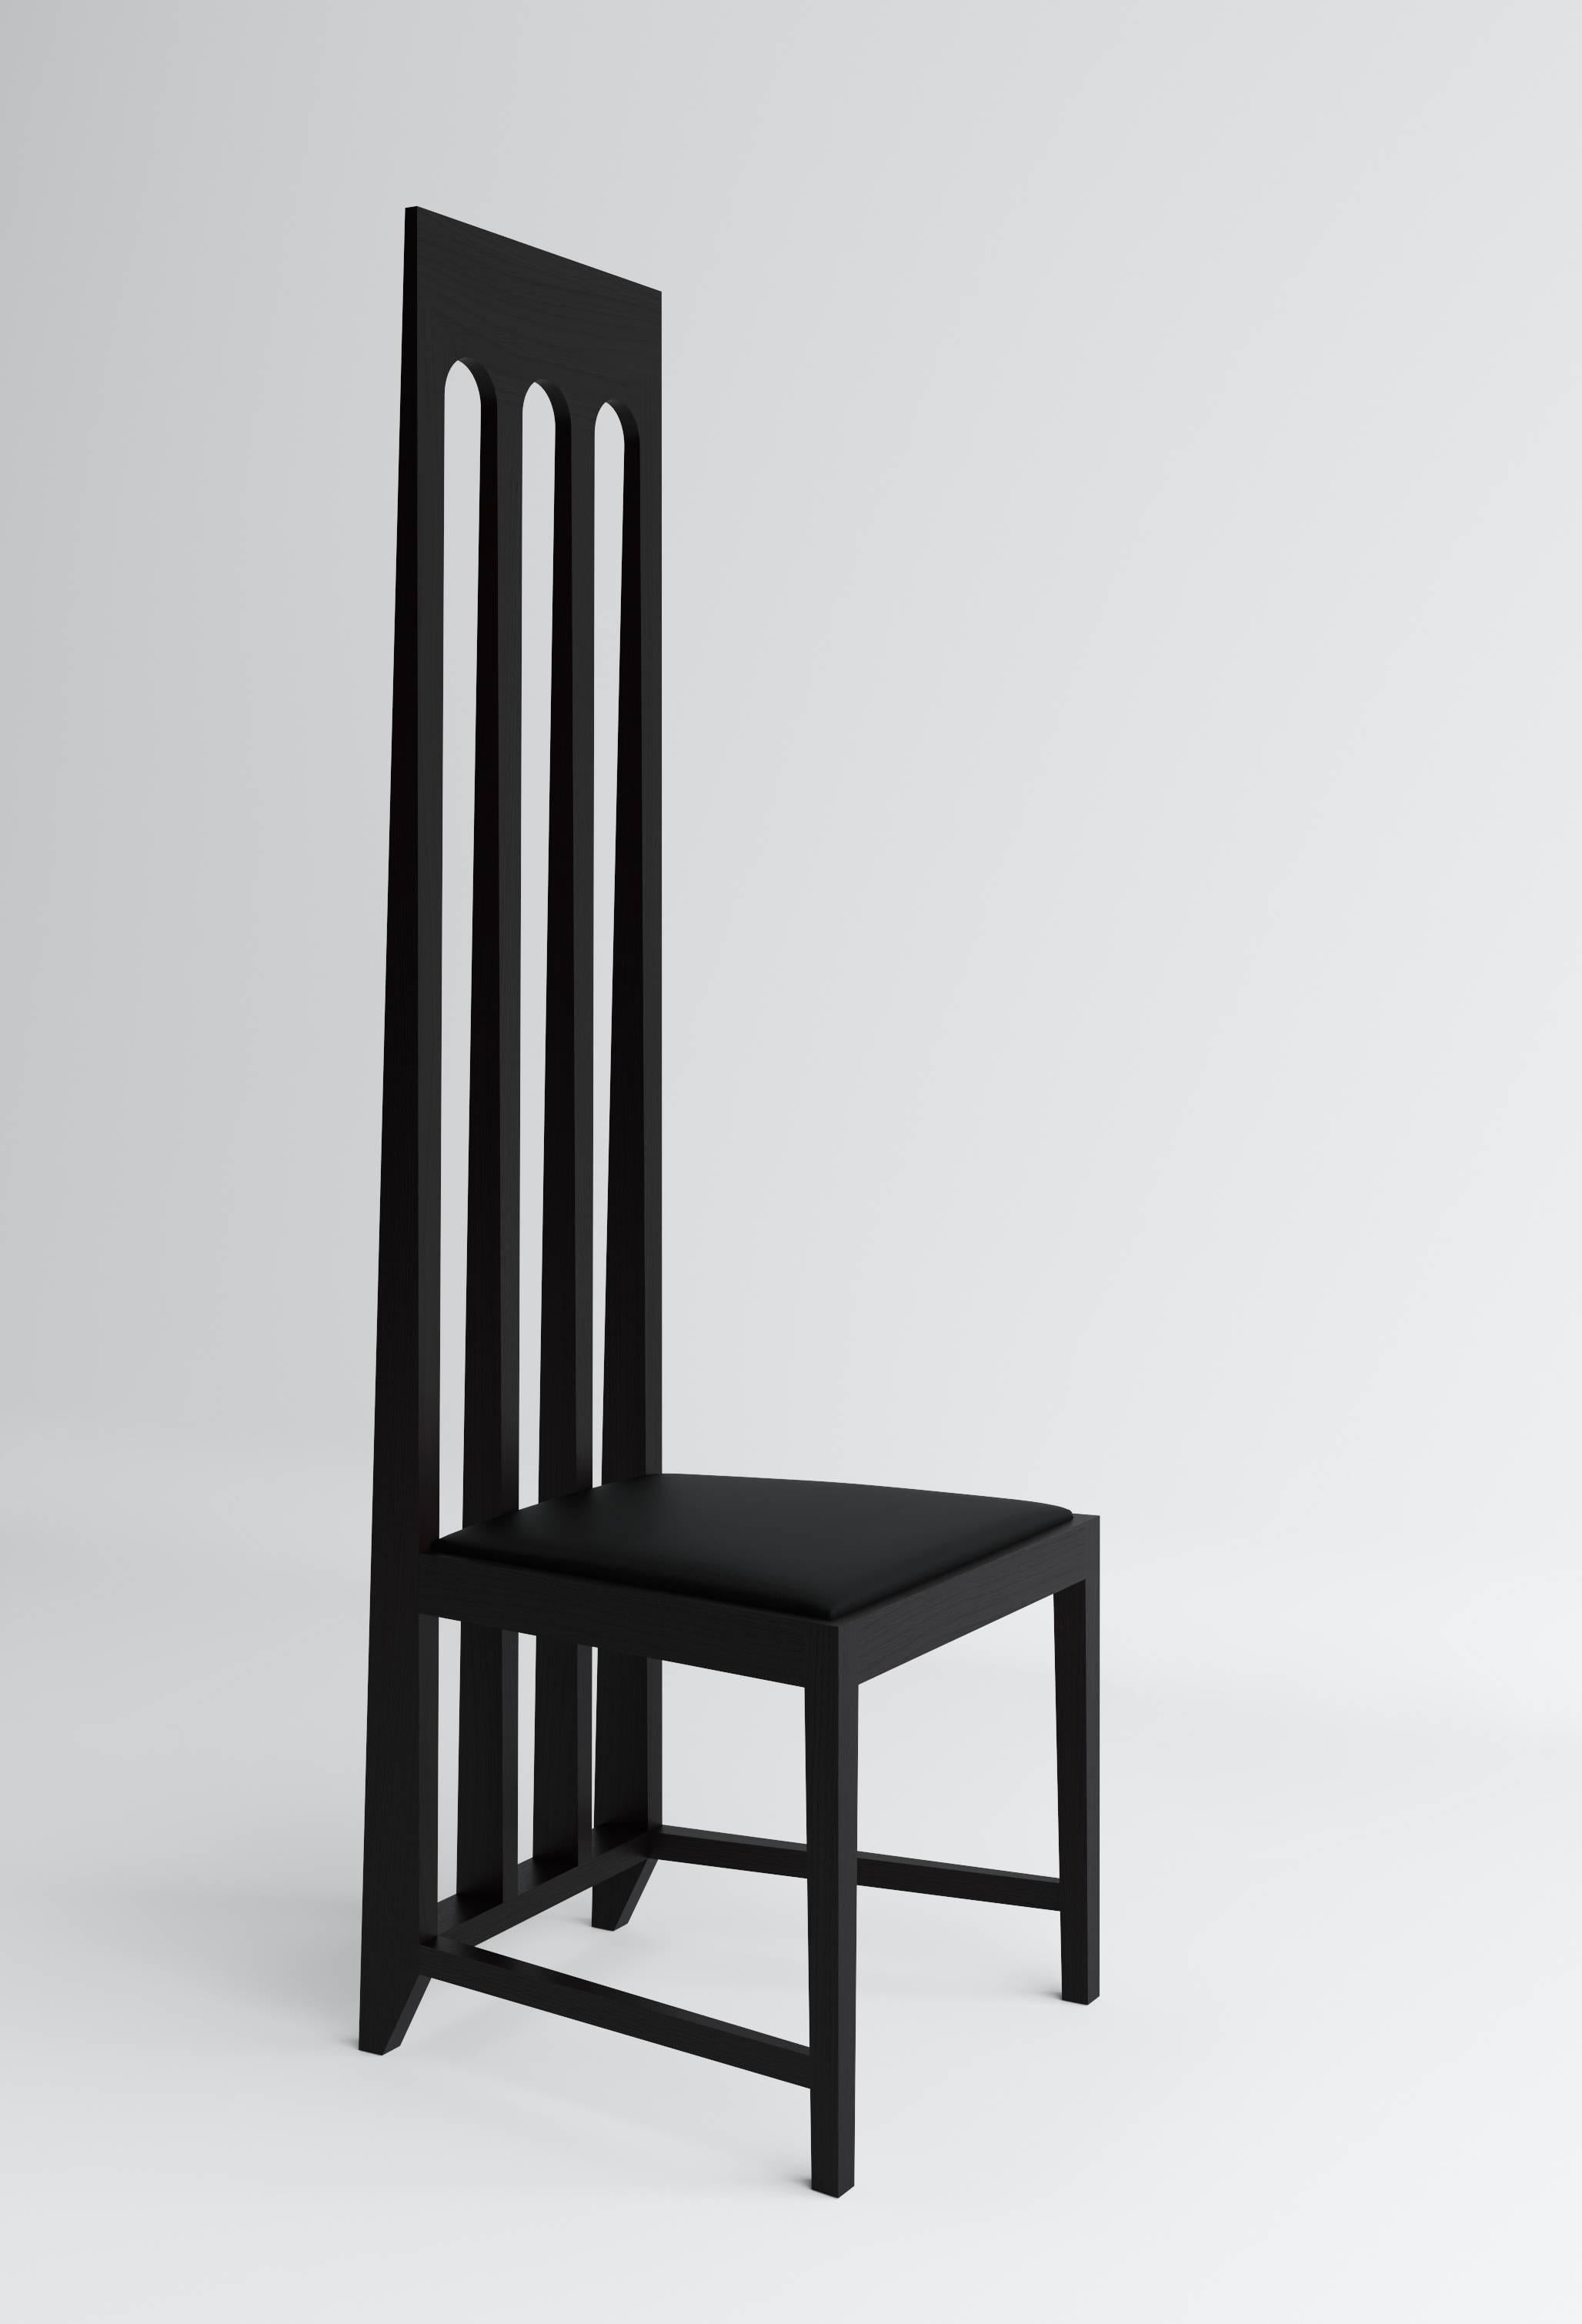 Chair by Russian designer Dmitry Samygin

Oak and plywood and black wool or leather for the seat

Measure: 113 cm x 49 cm x 48 cm.